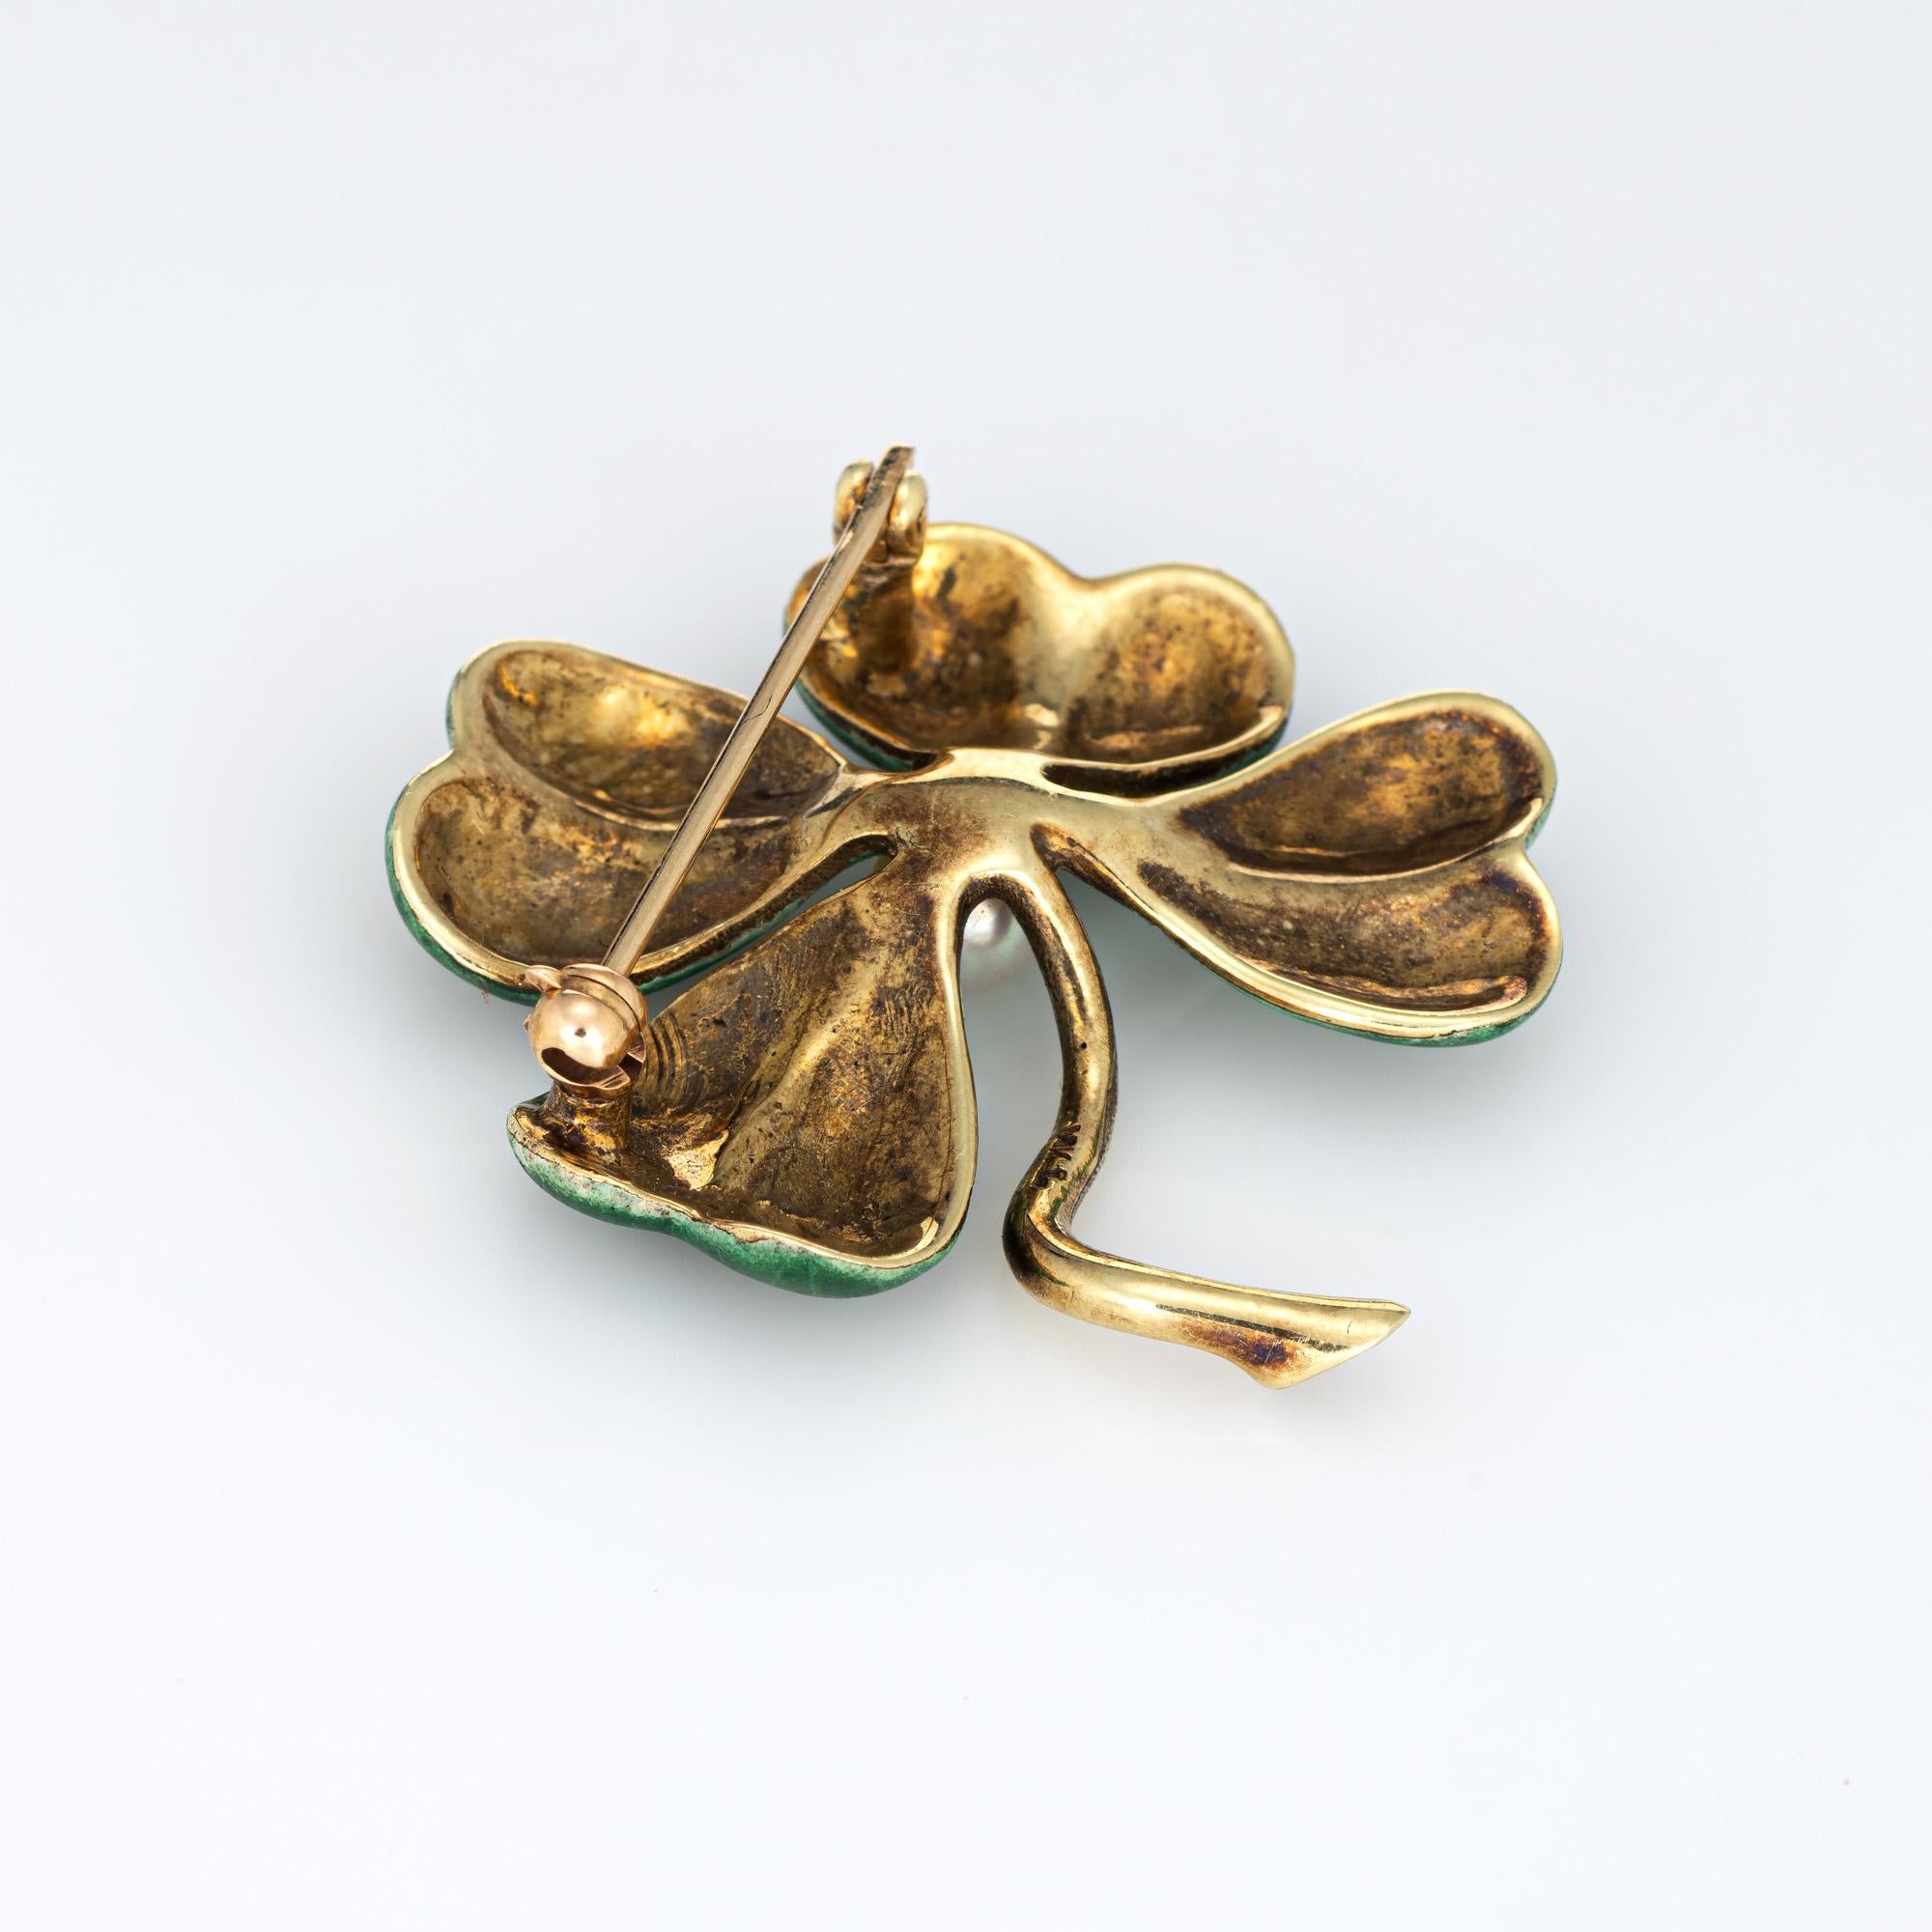 Finely detailed antique Art Nouveau Larter & Sons four leaf clover enameled brooch (circa 1910s) crafted in 14 karat yellow gold. 

One 5mm cultured pearl is set into the brooch.  

The four leaf clover brooch is enameled in dark green to lighter